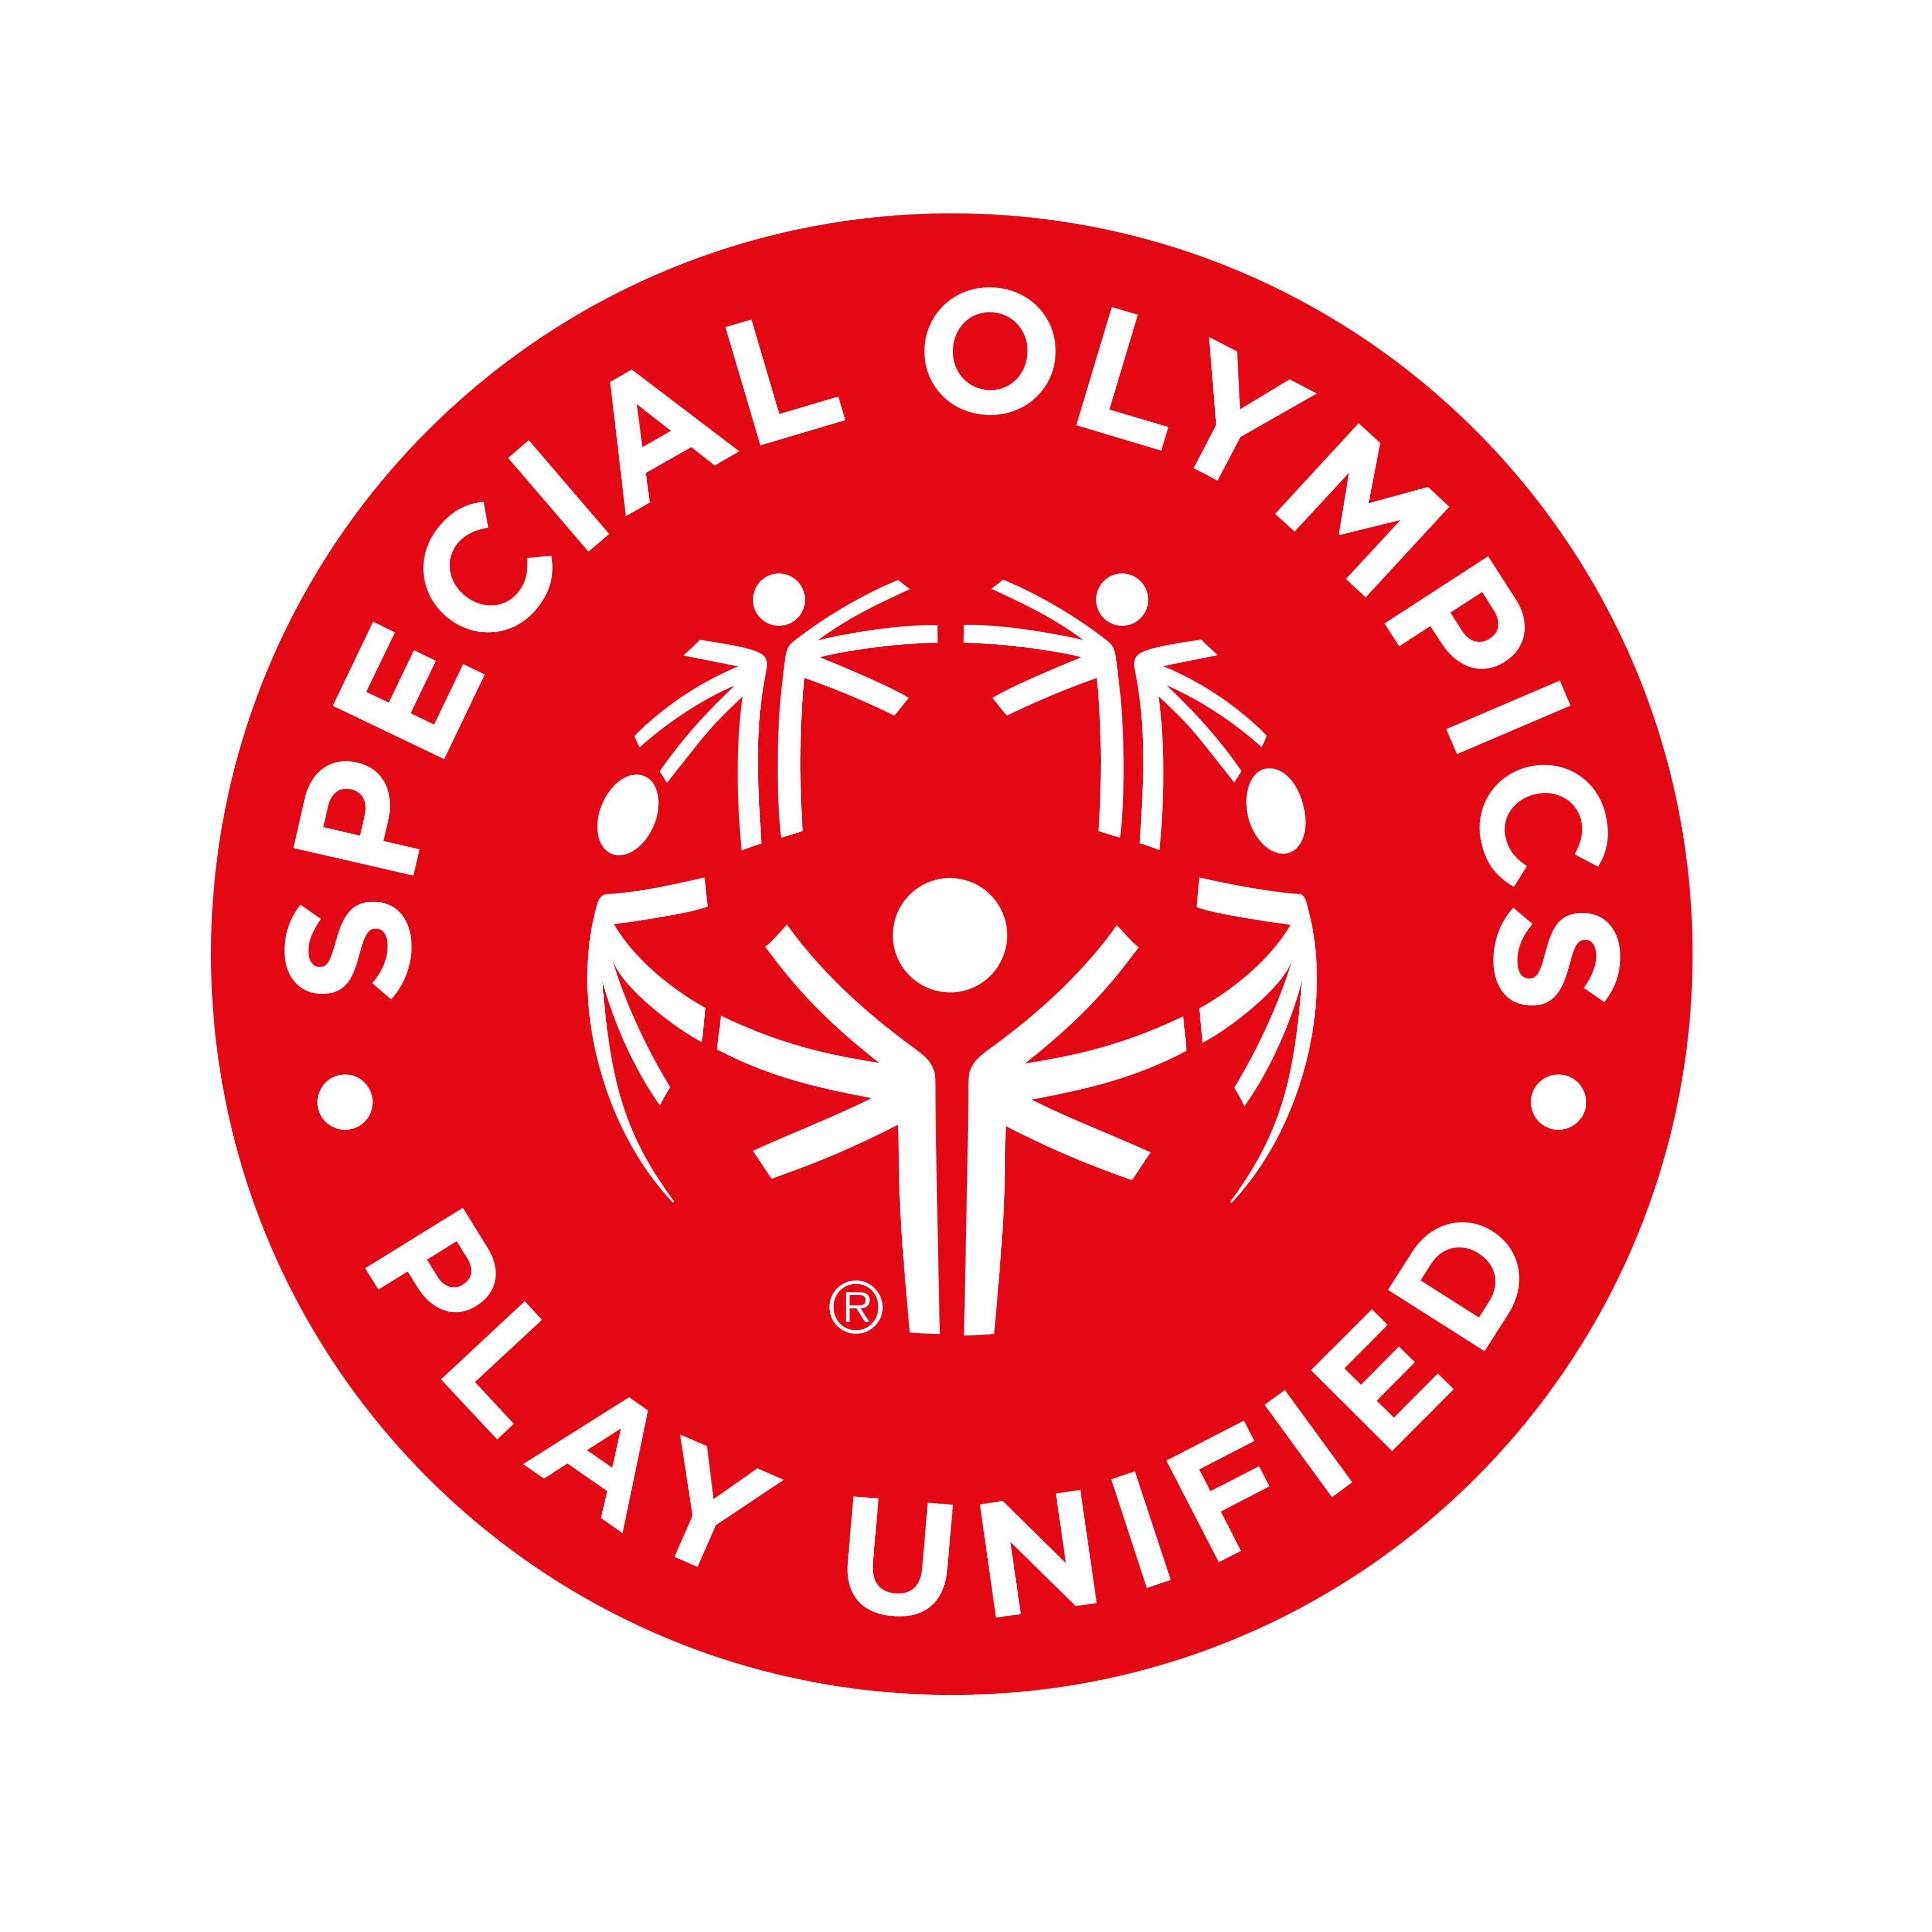 Special Olympics Play Unified Logo Download